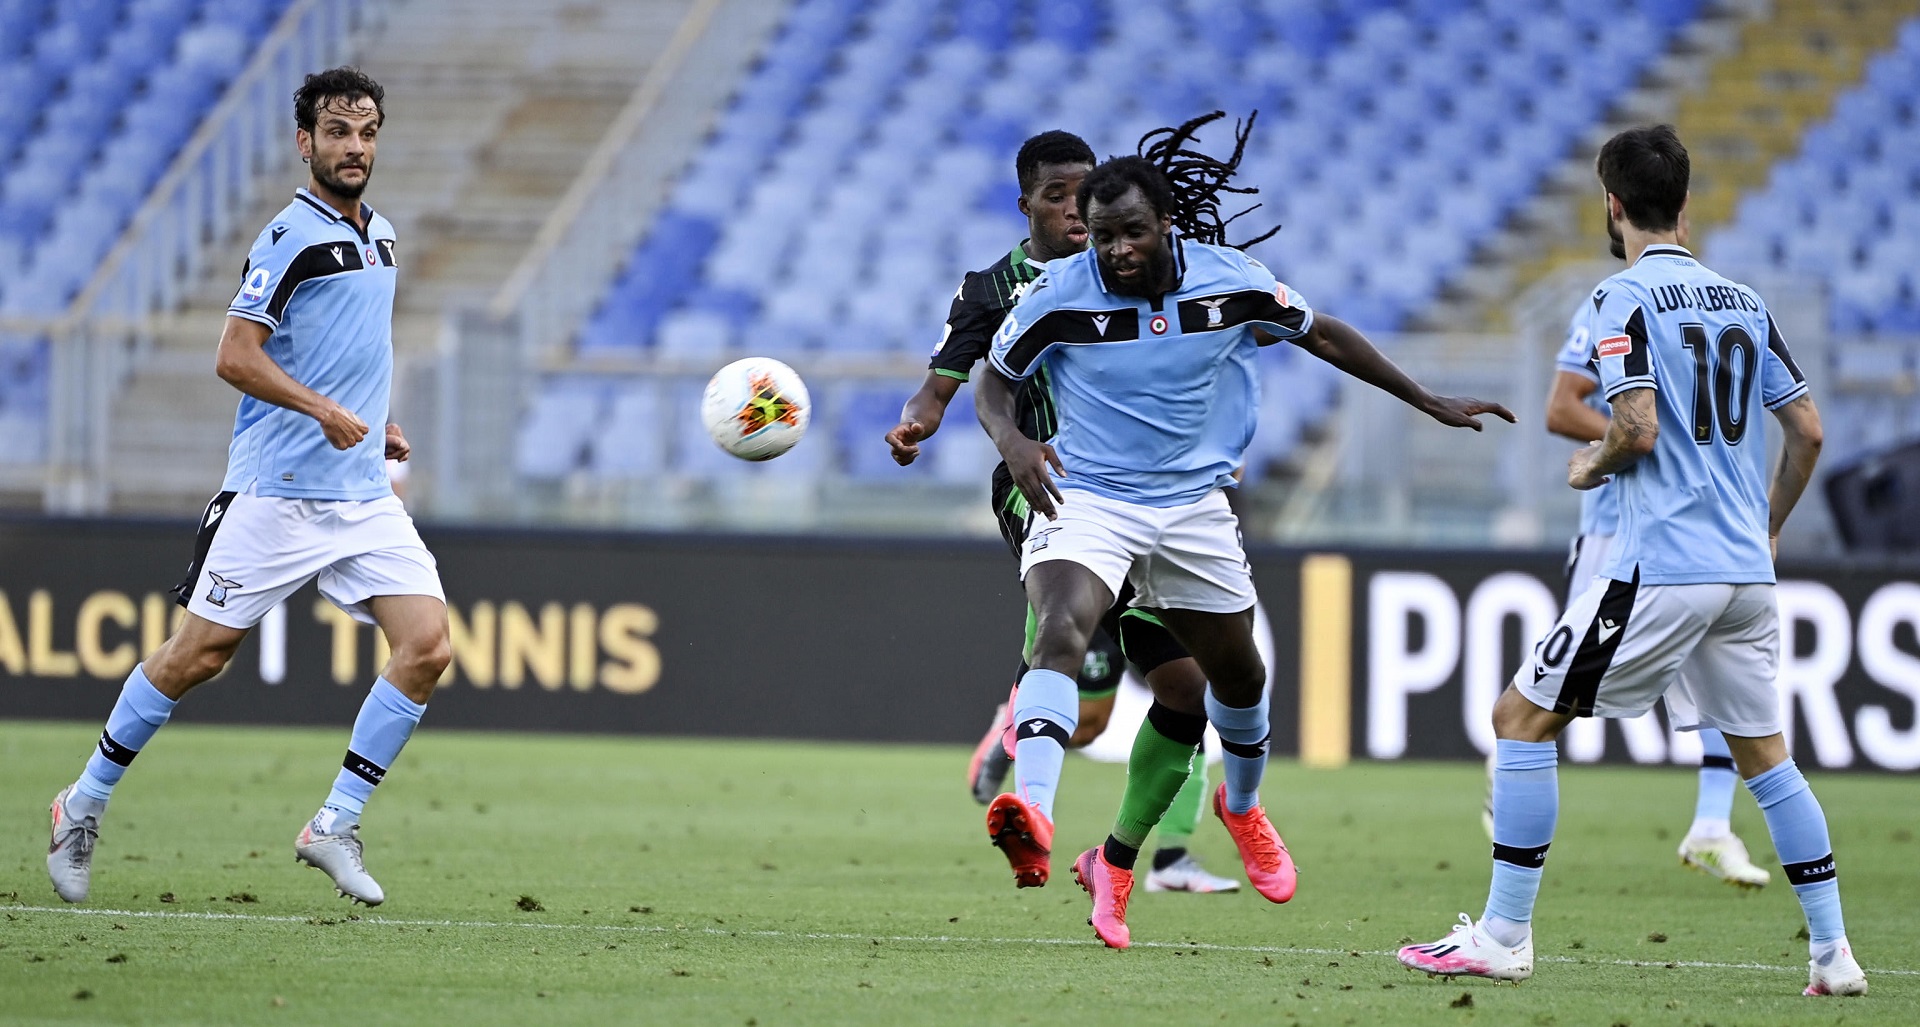 epa08540584 Lazio's Jordan Lukaku in action during the Serie A soccer match between SS Lazio and US Sassuolo at the Olimpico stadium in Rome, Italy, 11 July 2020.  EPA/RICCARDO ANTIMIANI